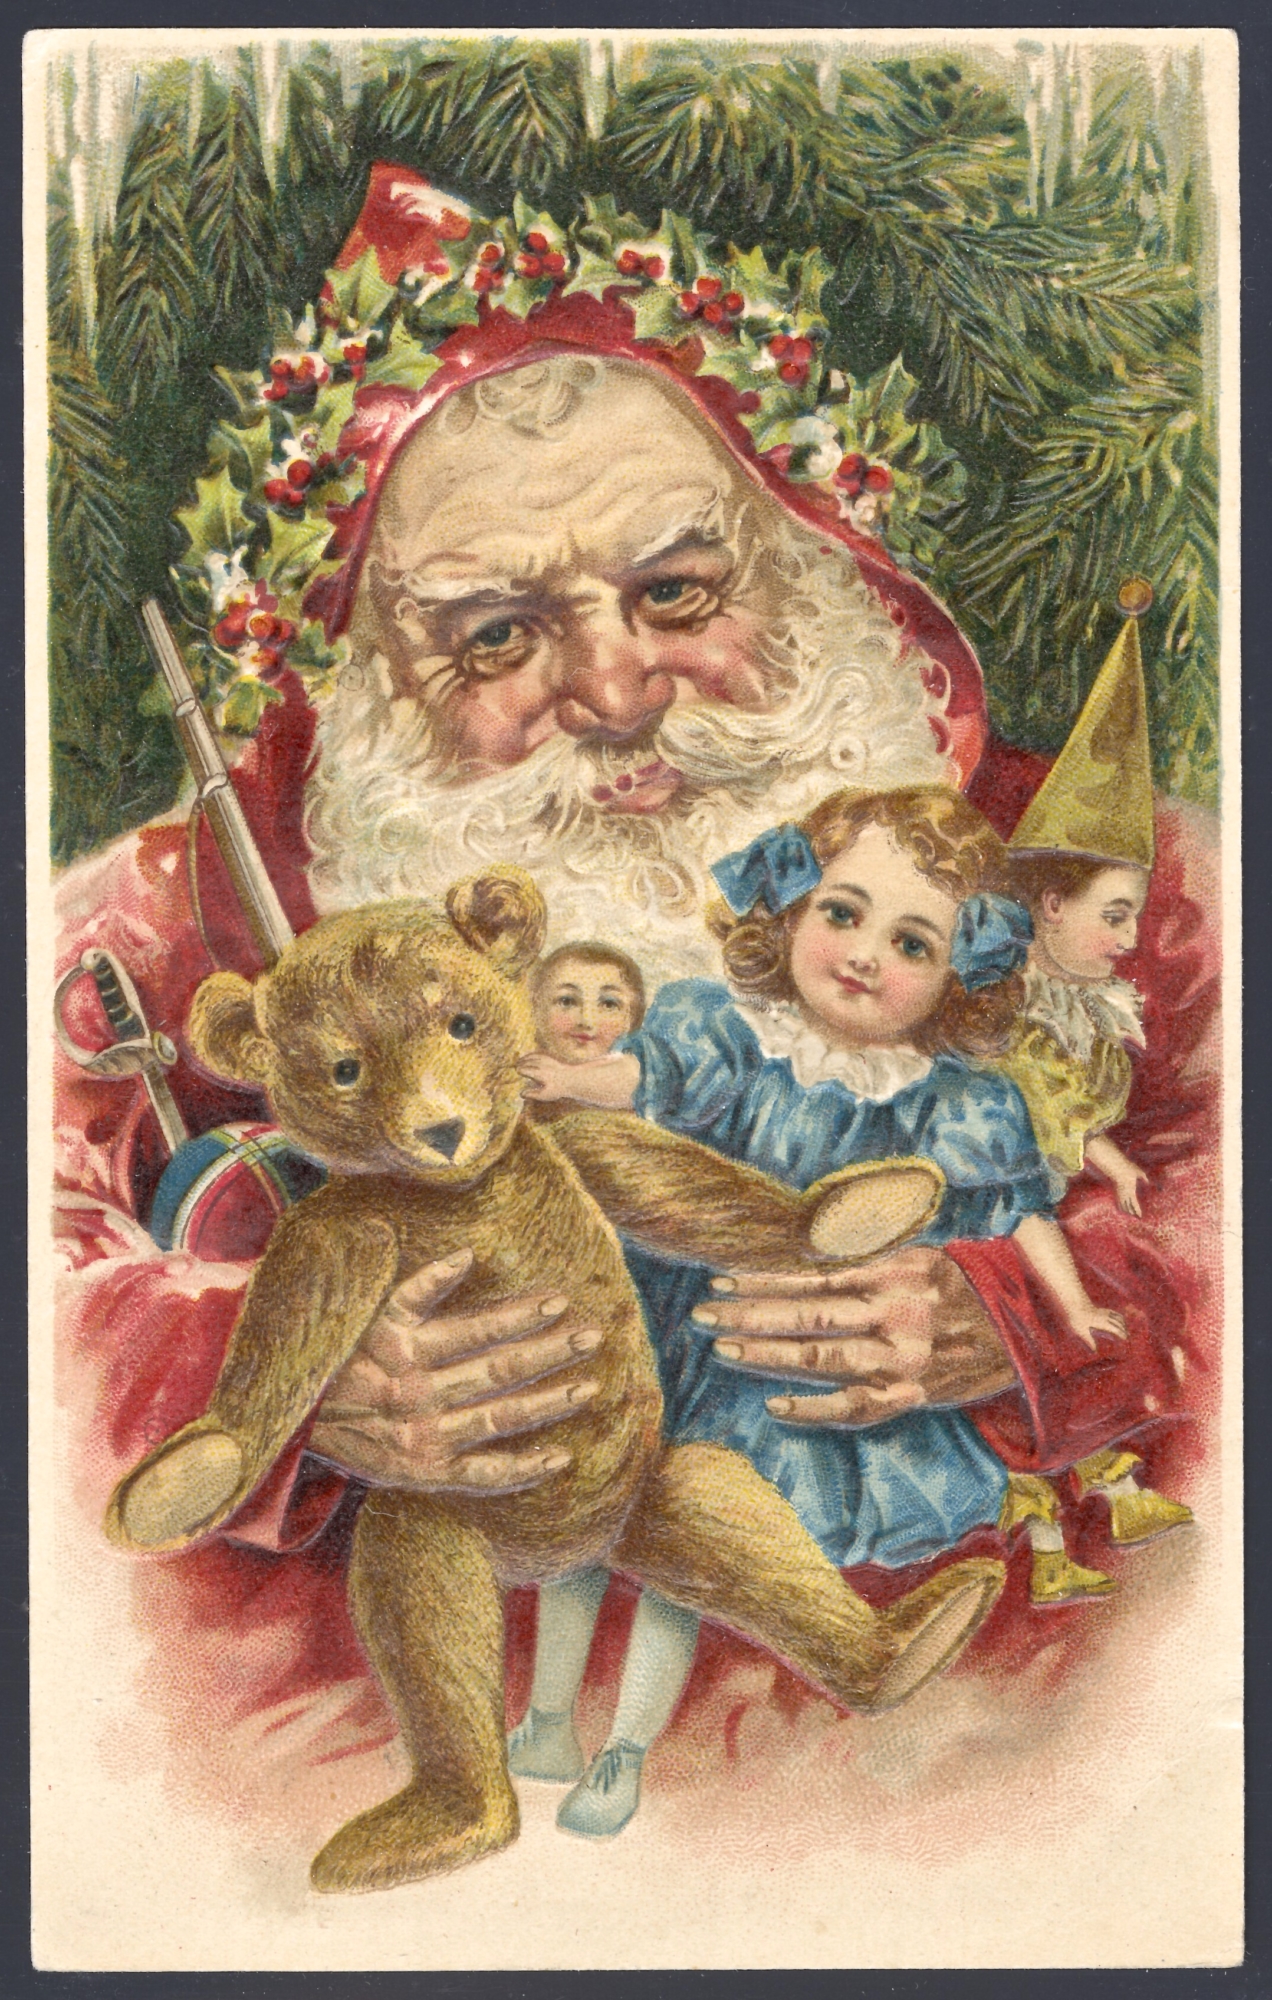 Santa wearing a red robe. Lithographed in Germany (embossed; no caption)